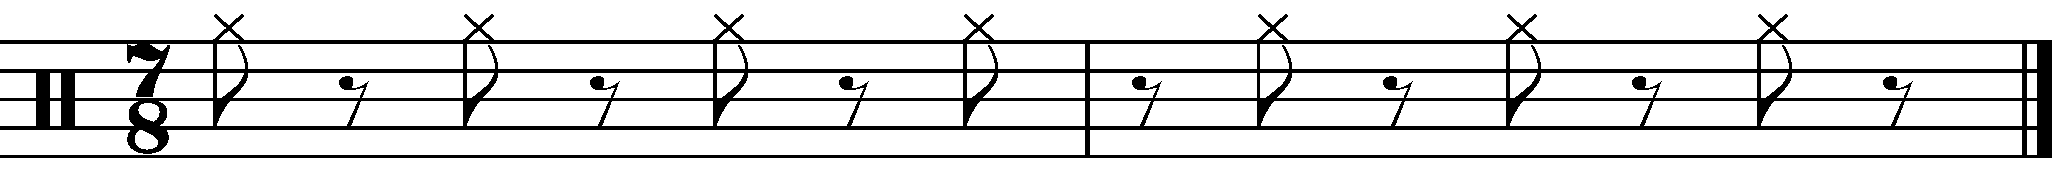 The base right hand rhythm for these grooves